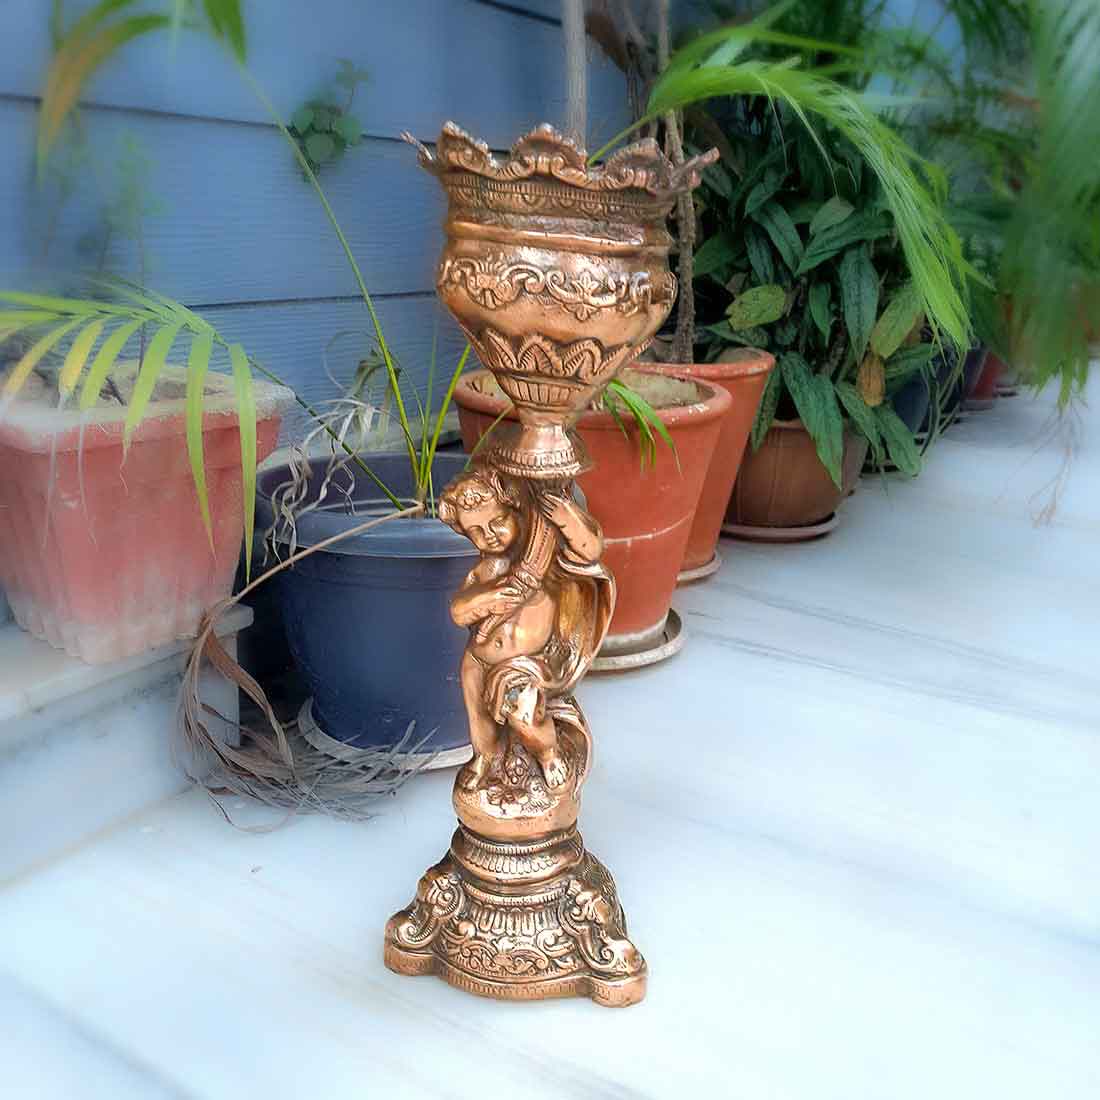 Vase | Flower Pot - Metal | Showpiece Cum Vase - Figurine Holding Mashal - for Home Decoration, Living Room, Table, Shelf, Office , Interior Decor | Gifts for All Occasions -18 Inch